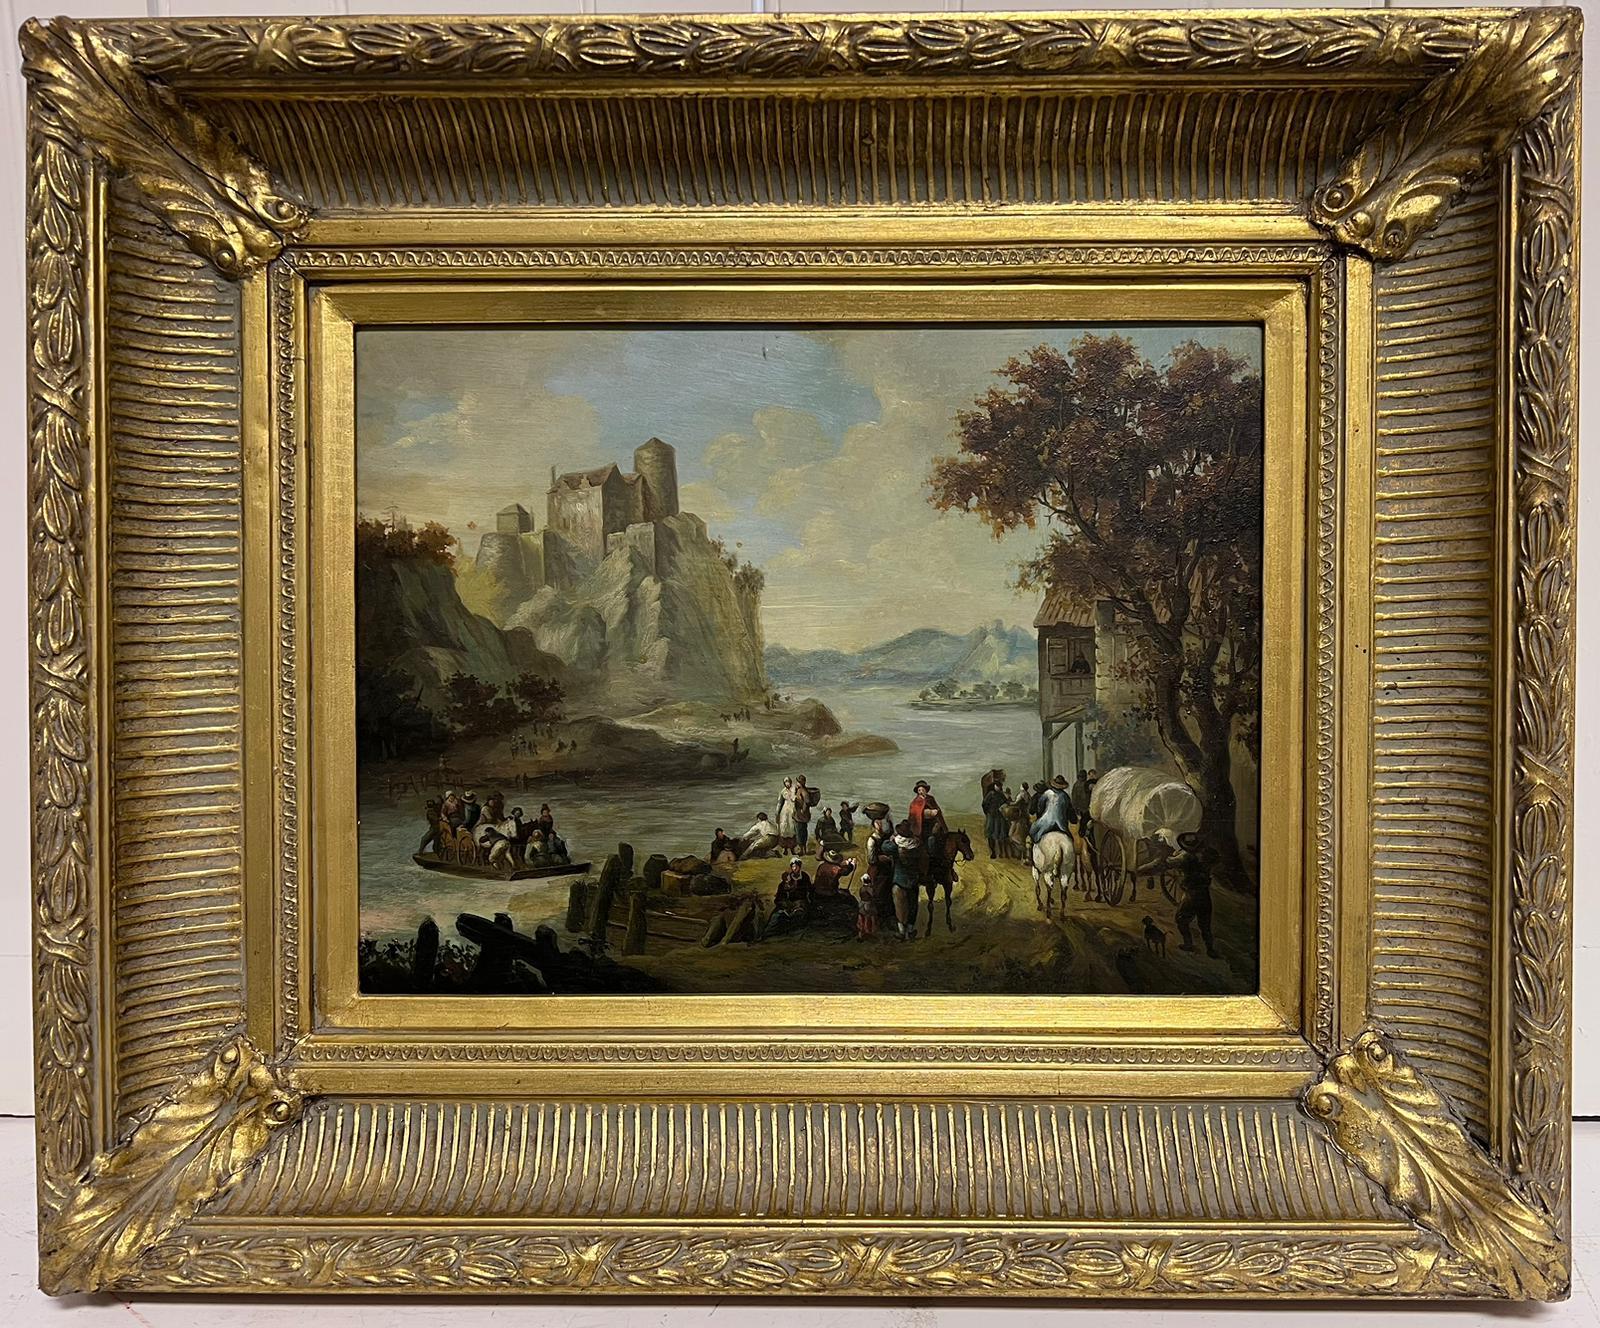 Travellers in Mountainous Landscape
Flemish School, 19th century
oil on board, framed
framed: 20 x 24 inches
board: 13.5 x 17 inches

Condition: good and sound condition 
Provenance: private collection, Paris
